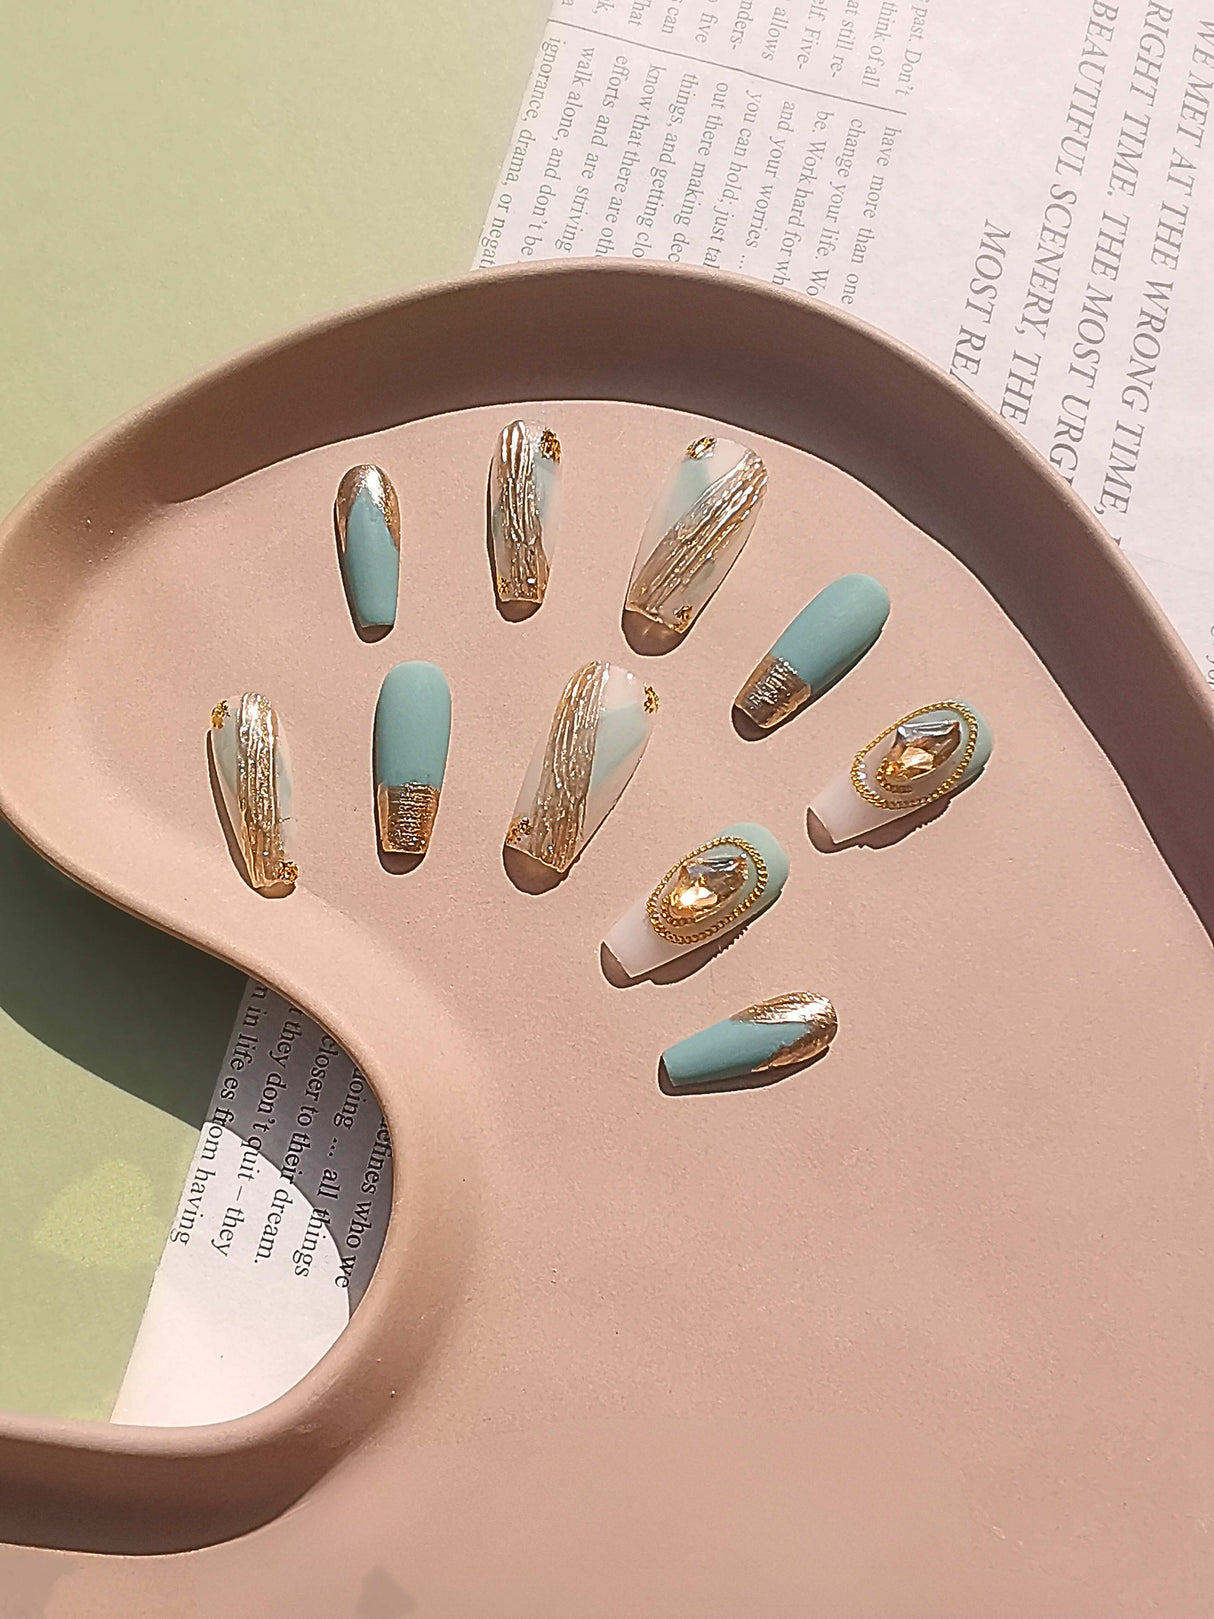 These press-on nails are  for cute purposes, with a dual-tone appearance, metallic gold accent, French tip effect, varying lengths, and oval tip shape. Displayed on a tray for aesthetic presentation.